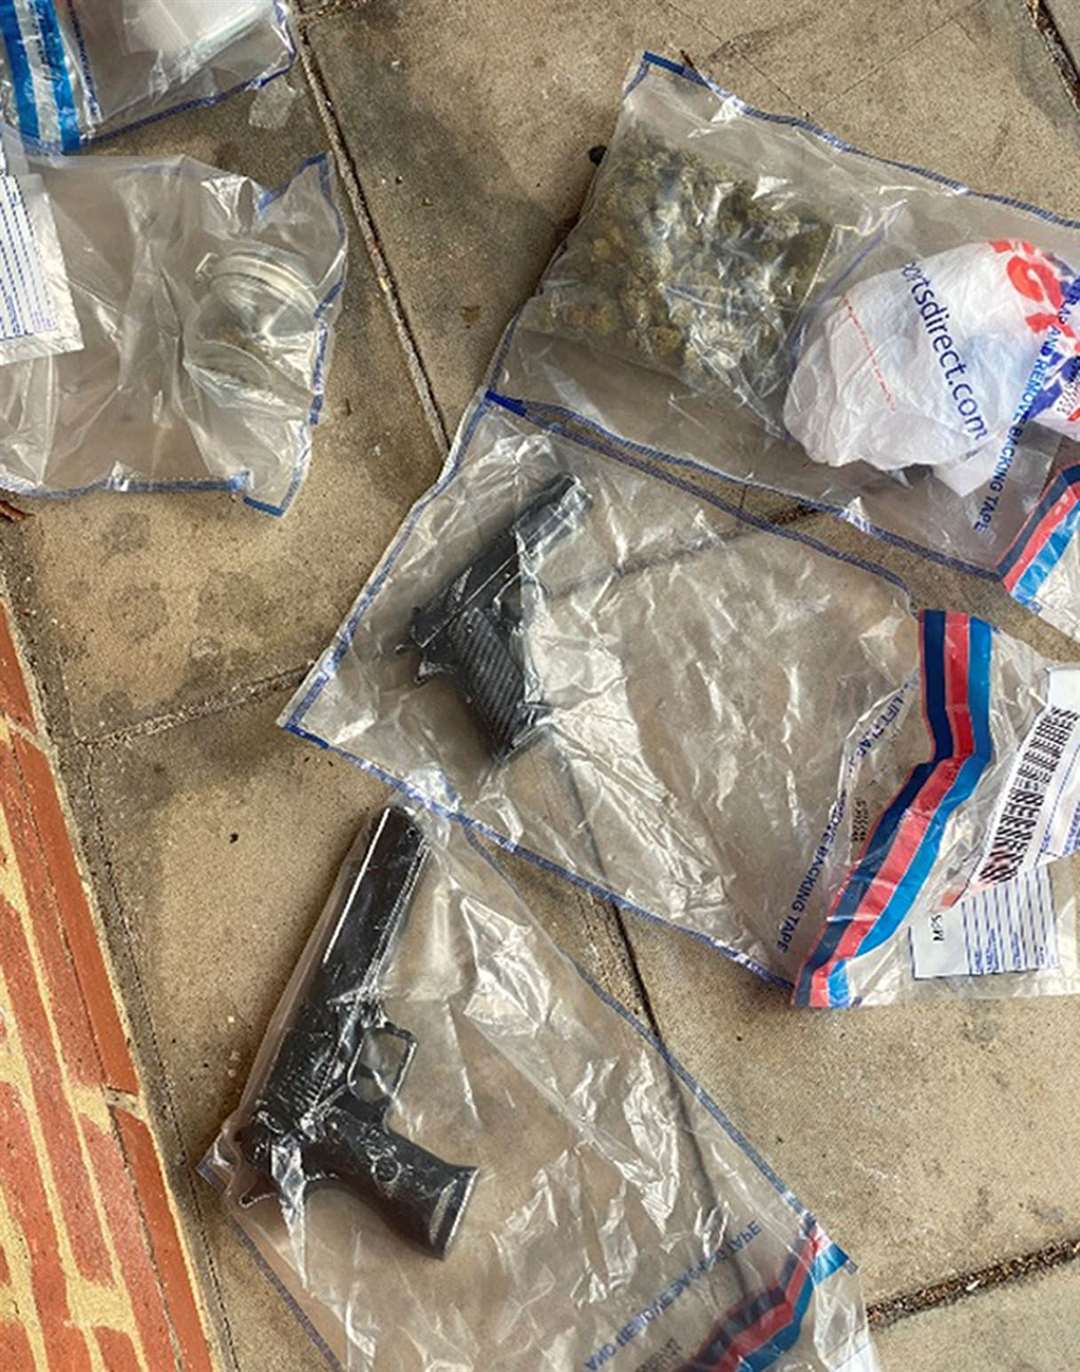 Drugs and guns found during Operation Pandilla (Met Police/PA)